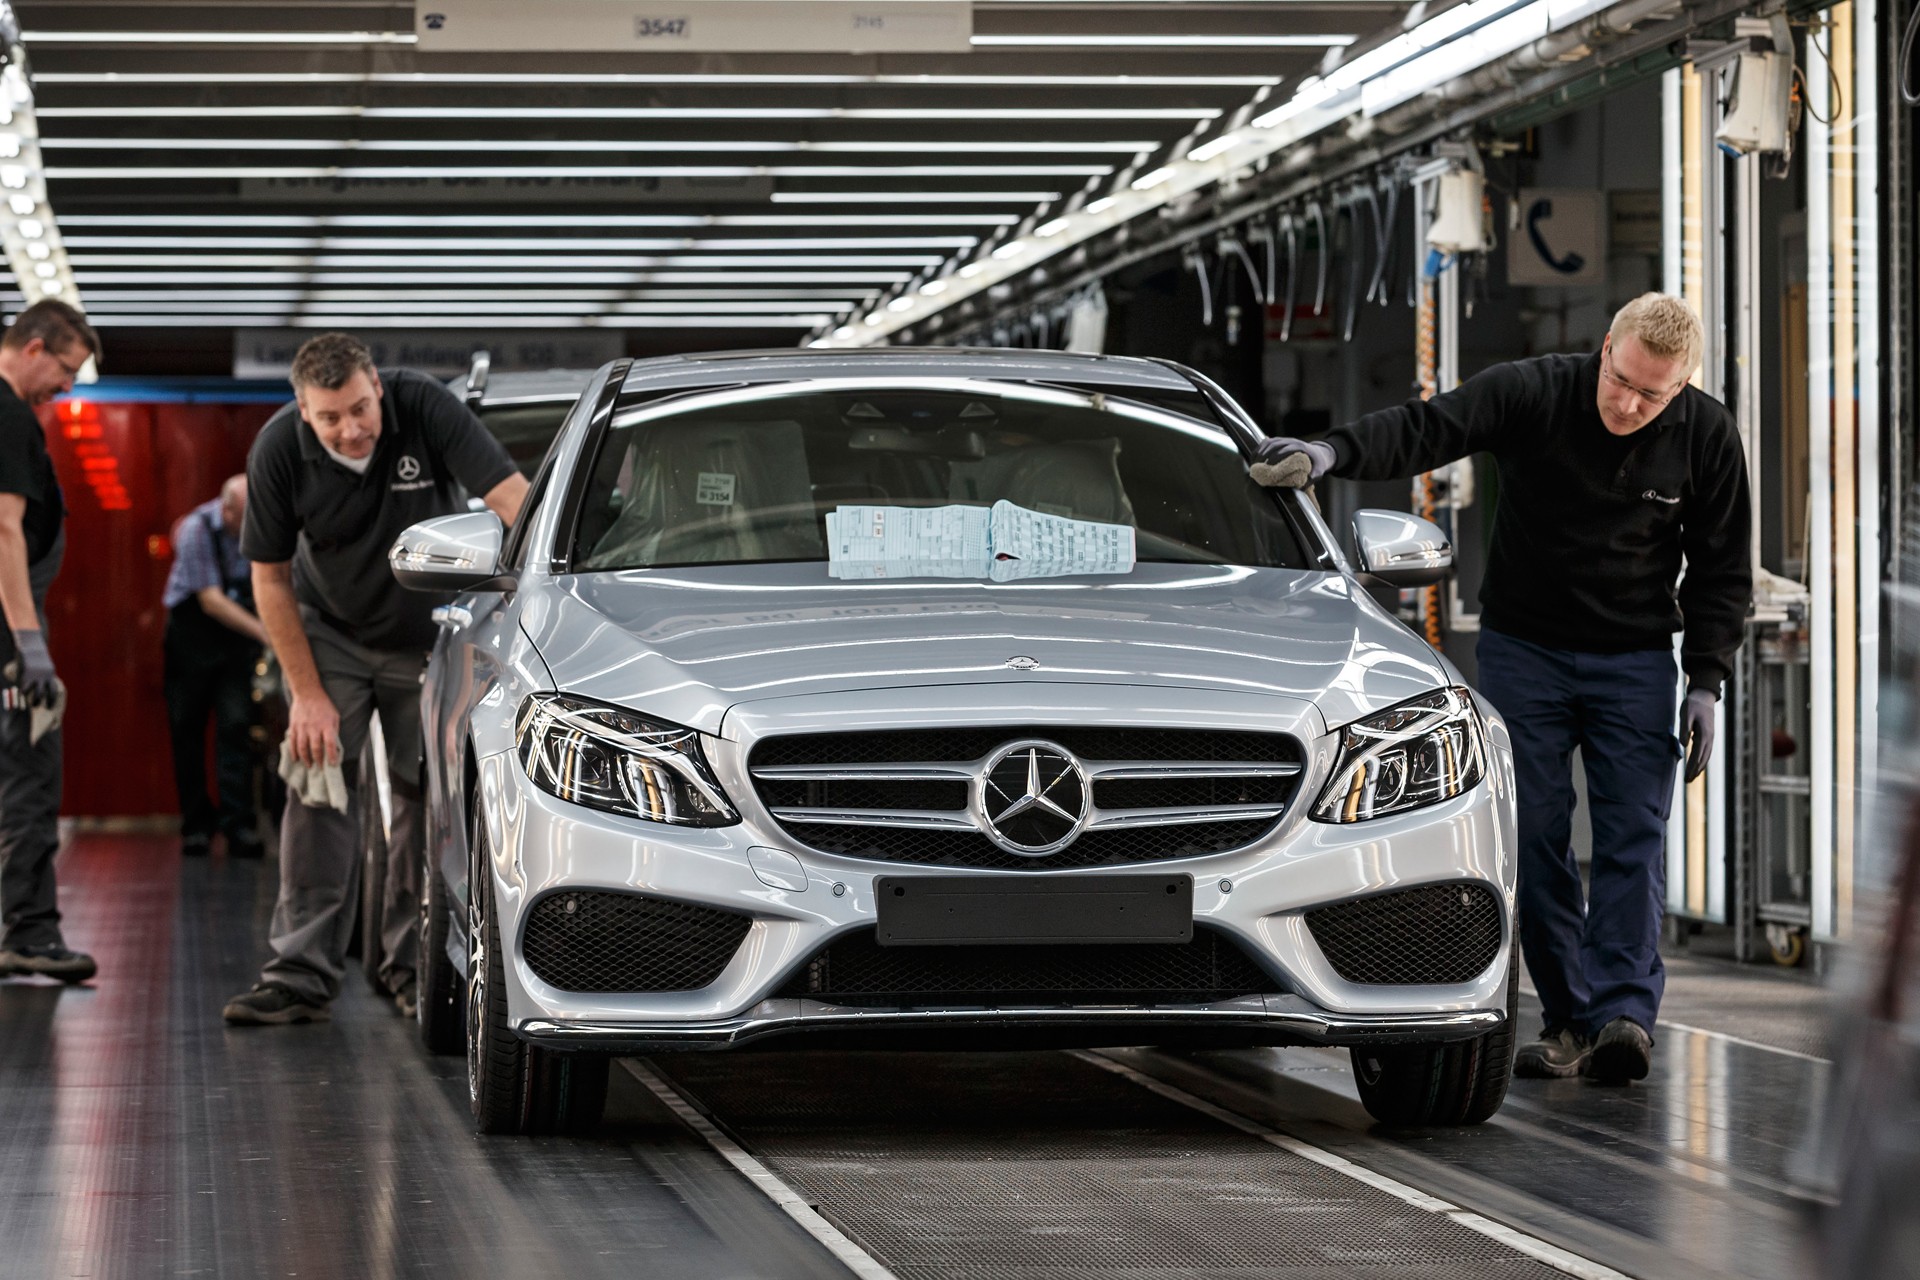 mercedes-benz usa investing in it infrastructure components